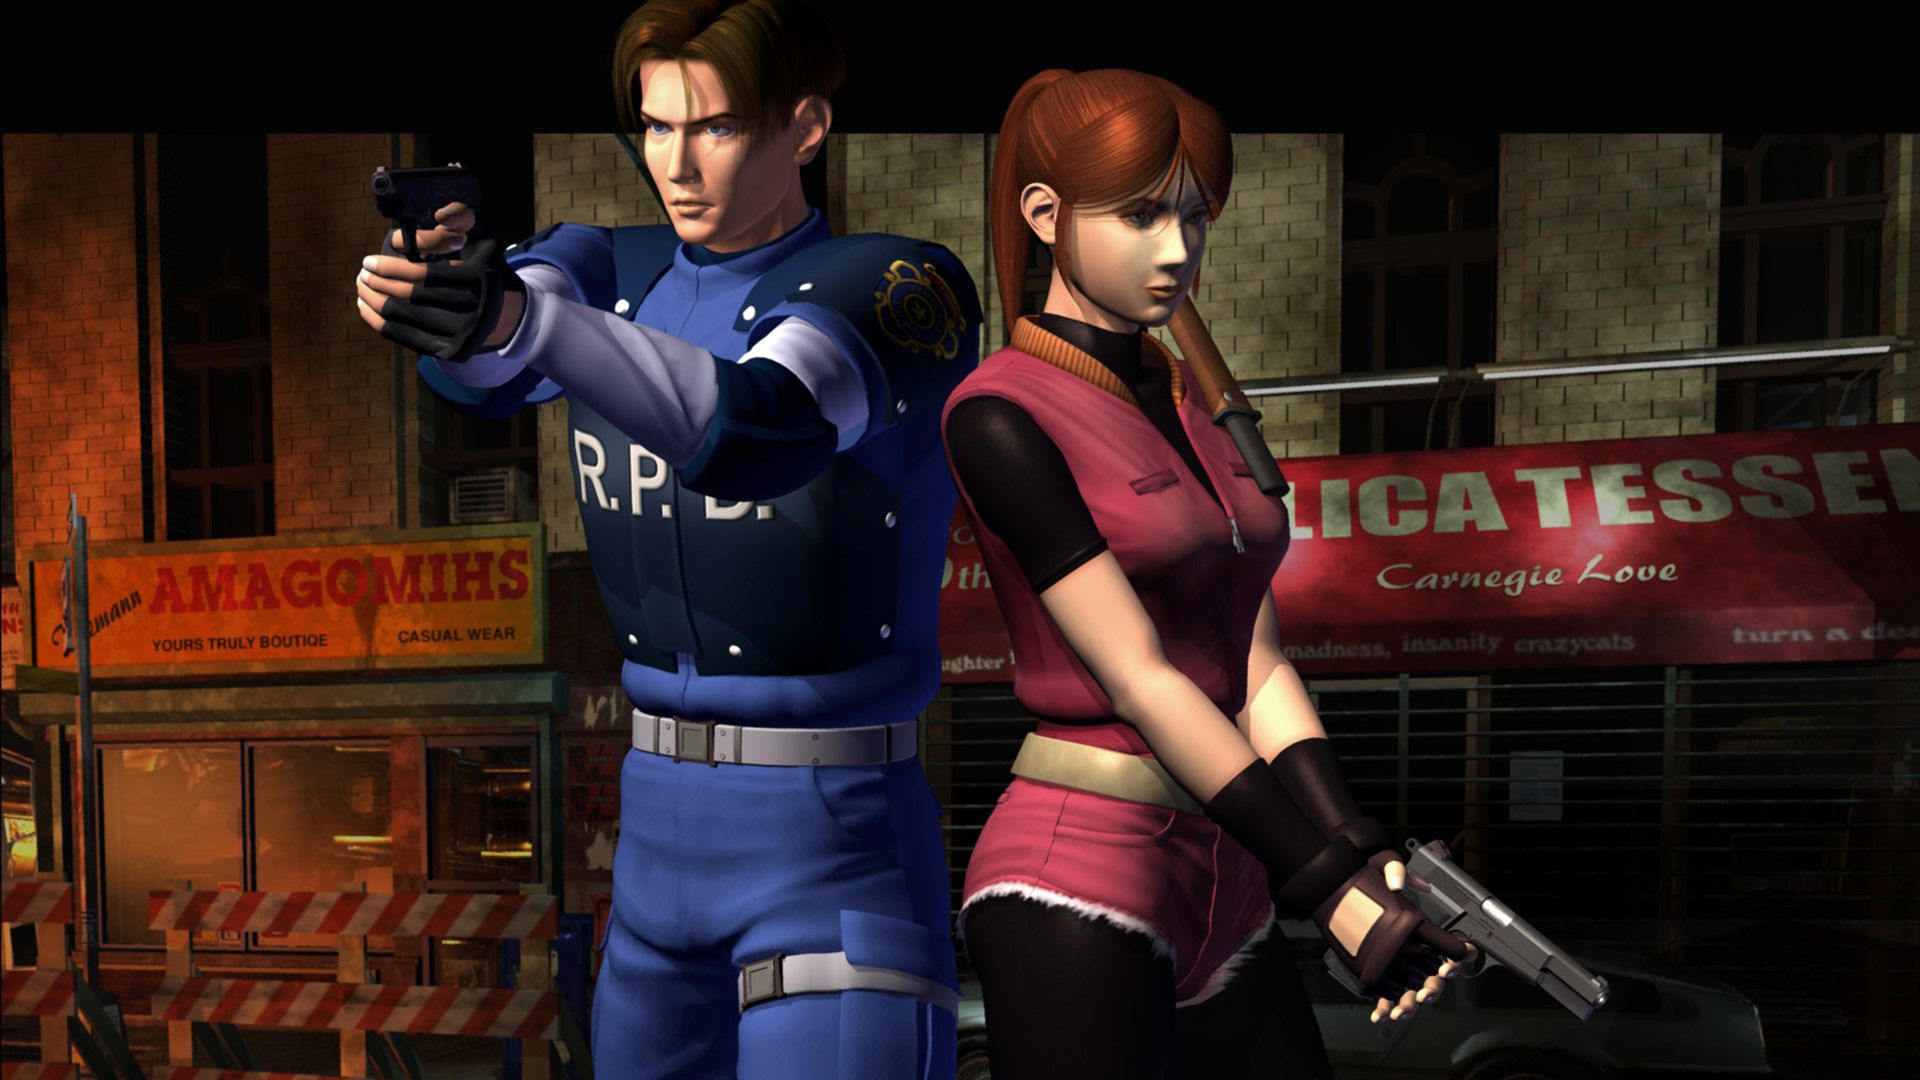 More Resident Evil Remakes on the way, Capcom affirms - Video